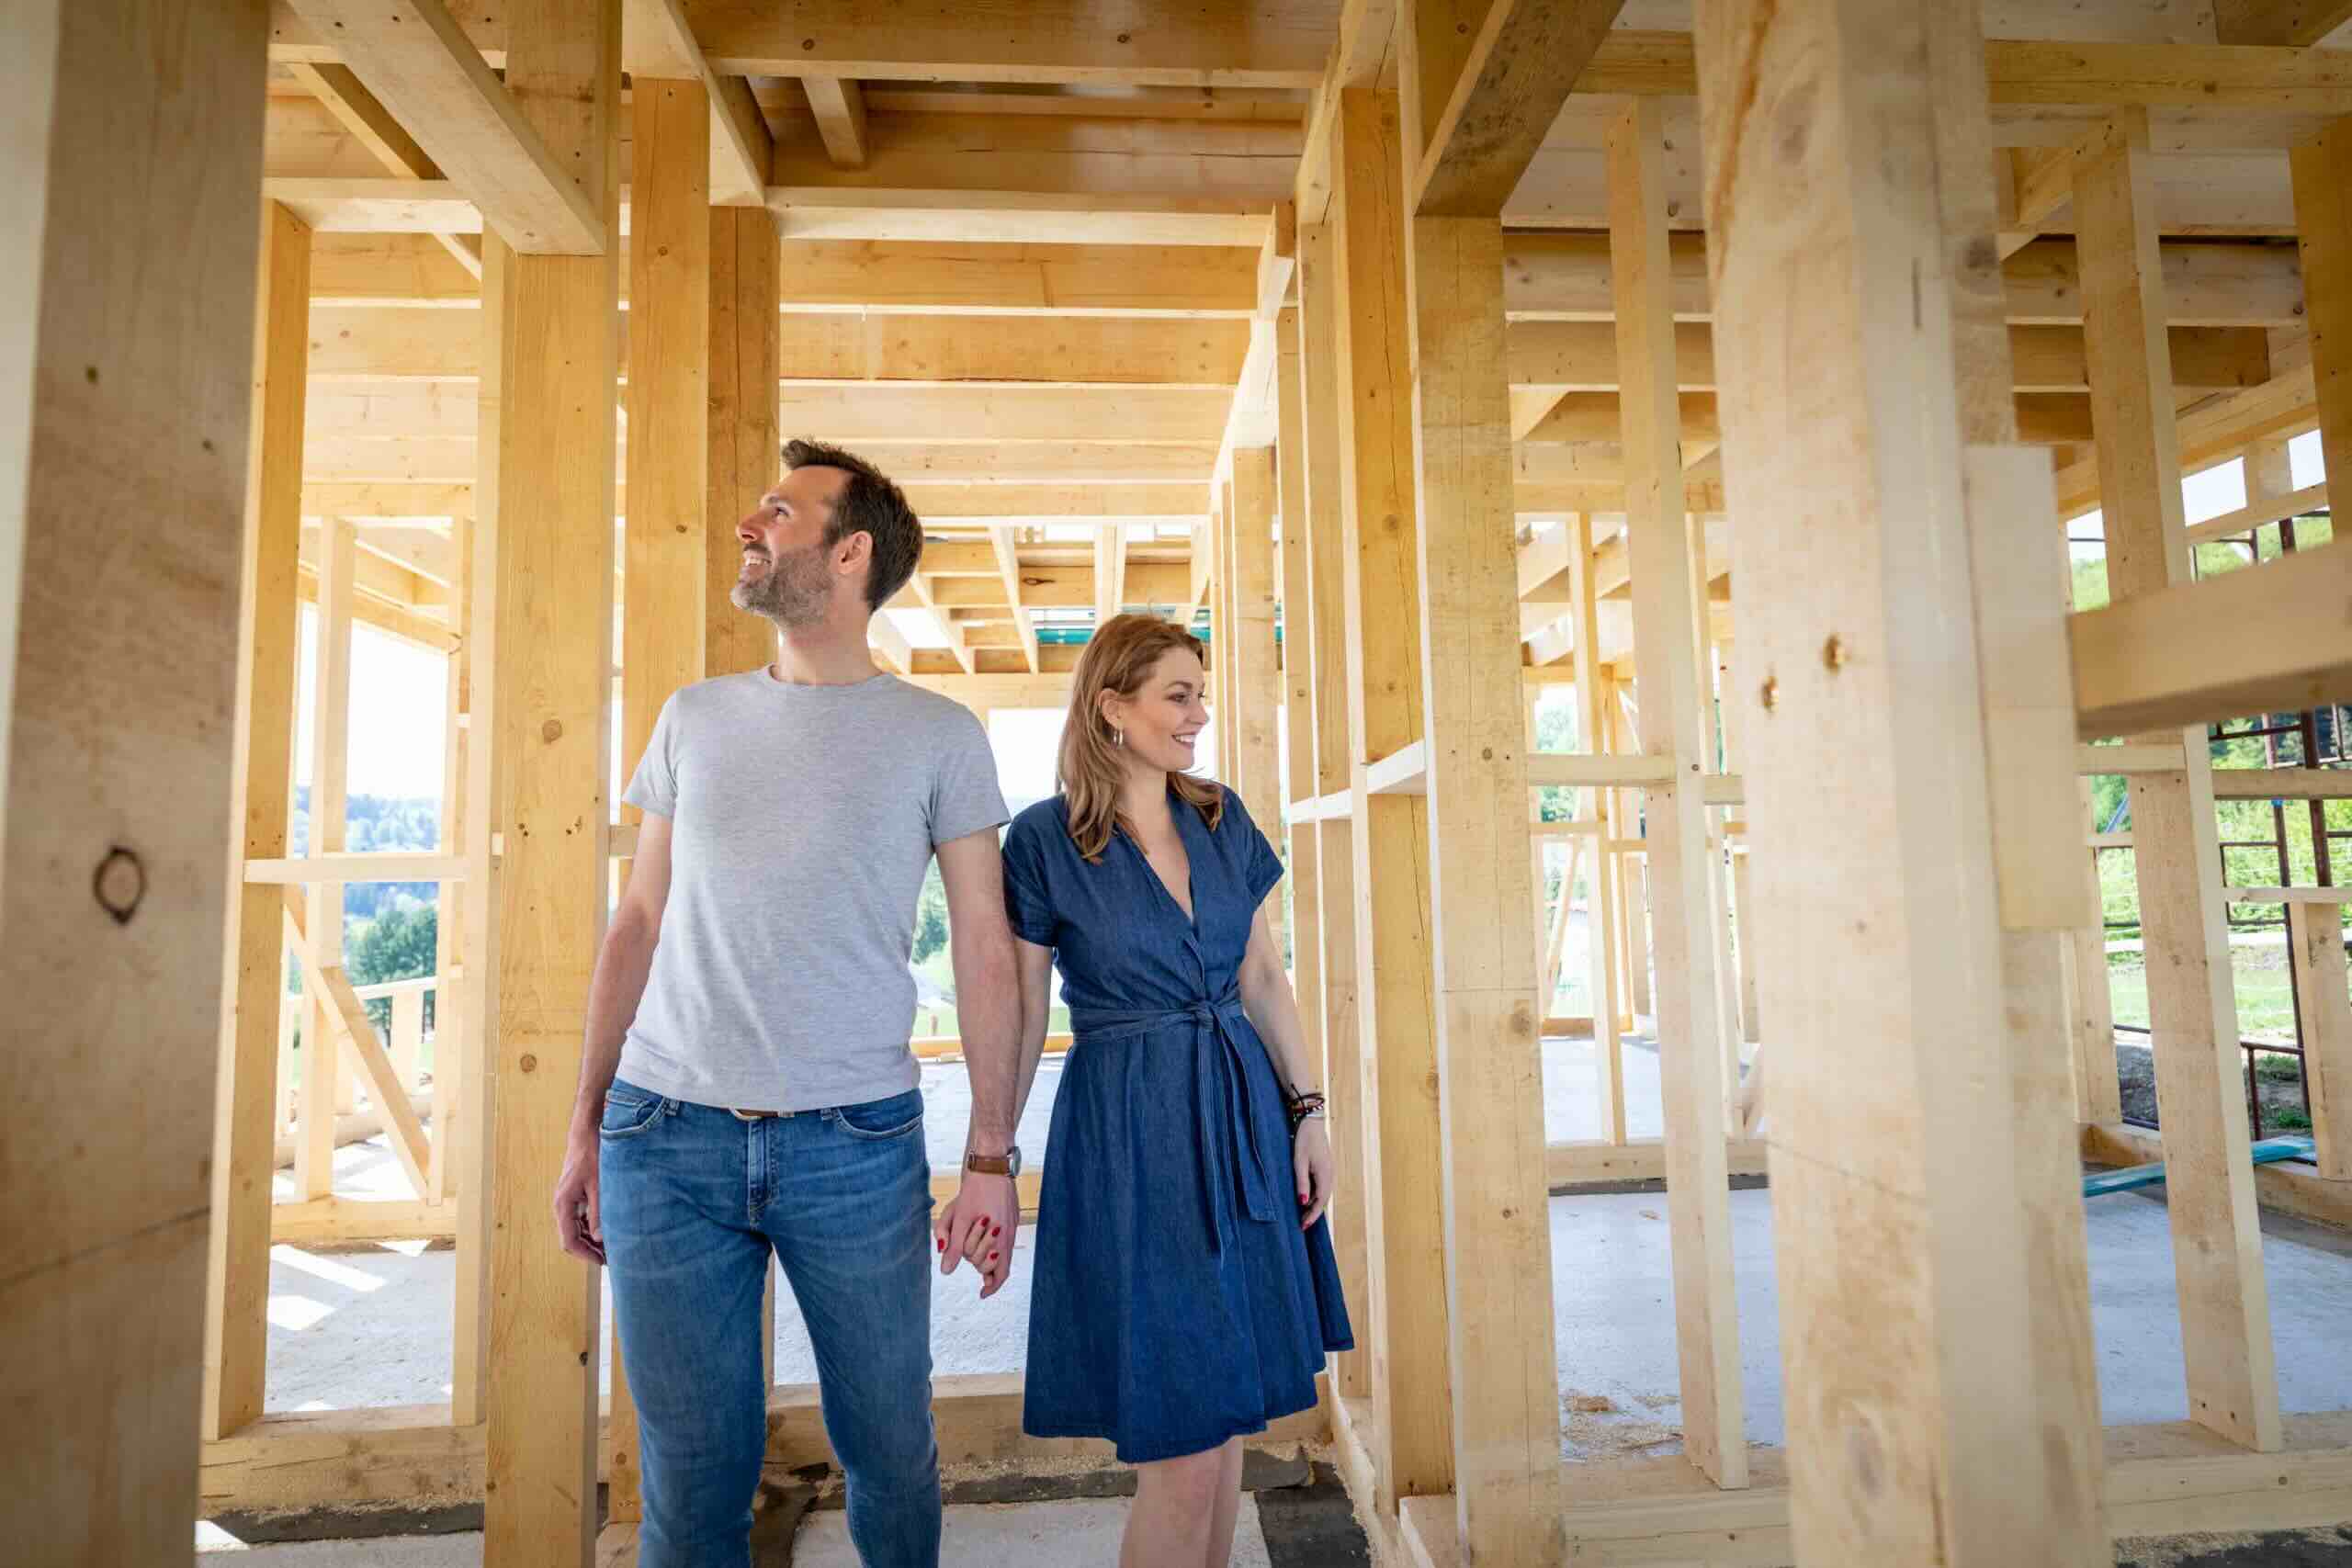 How Does Buying A Pre-Construction Condo Work